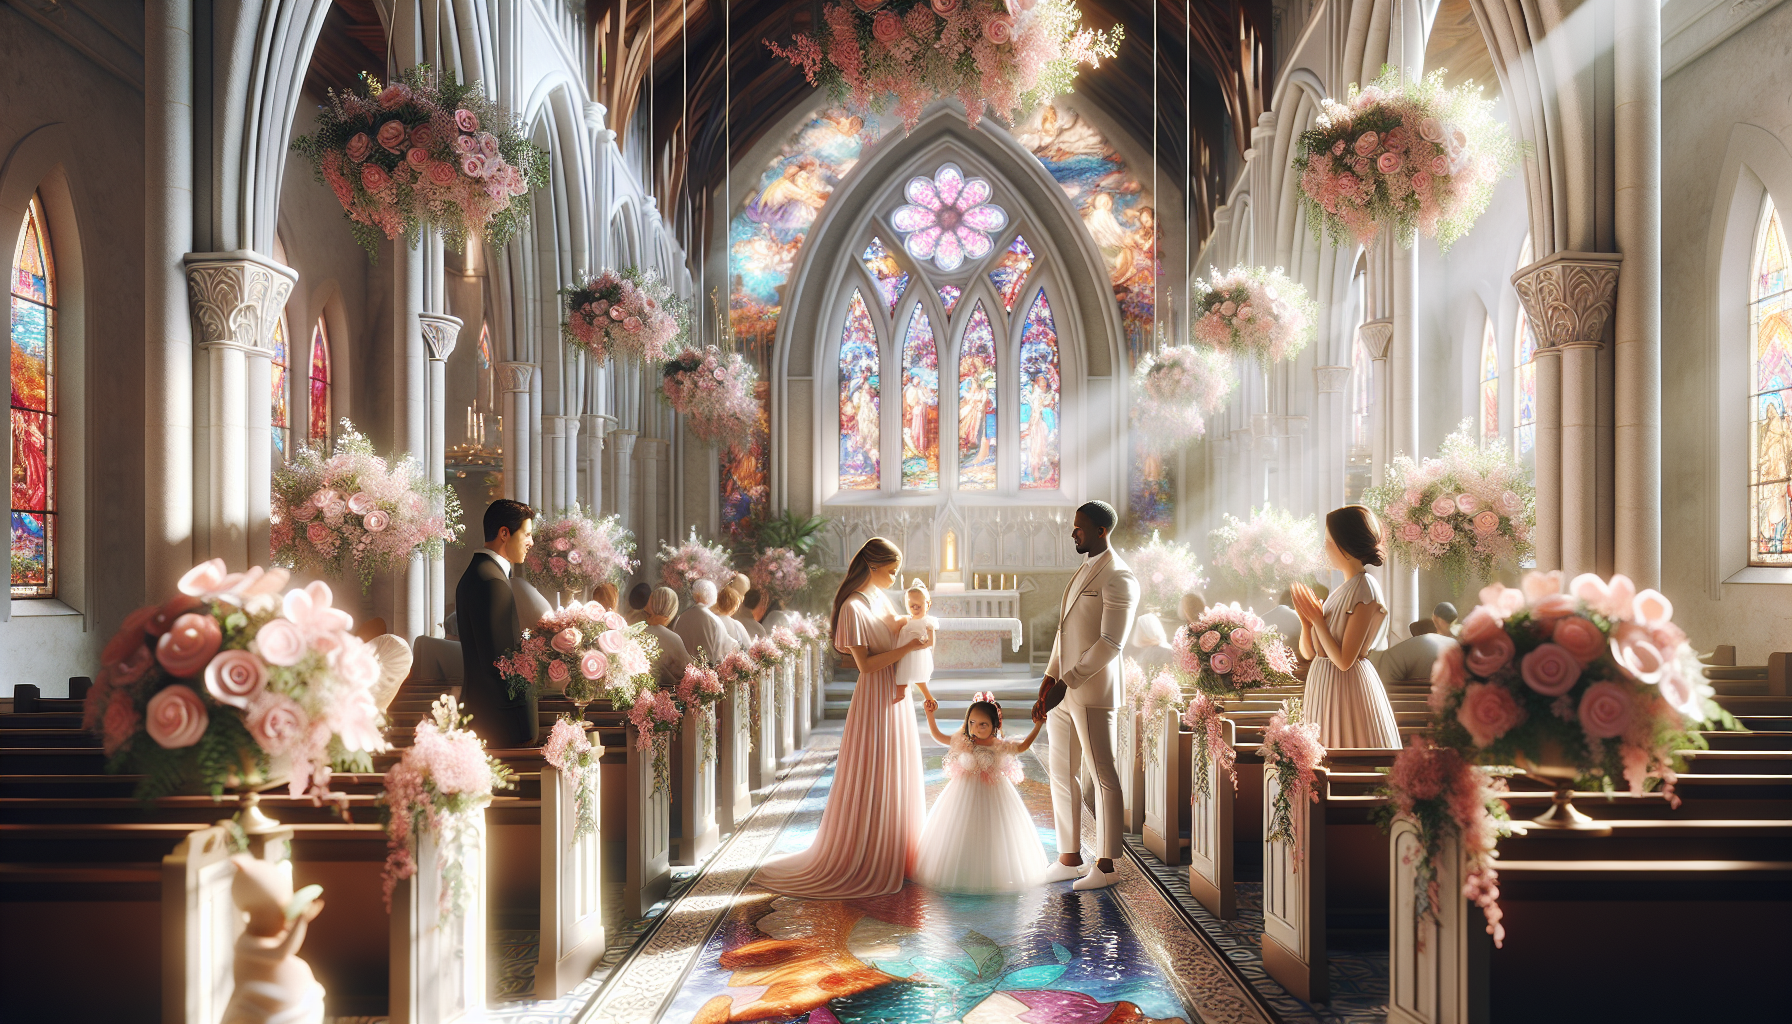 An elegant baptism ceremony for a baby girl, with a serene church setting decorated with white and pink flowers, the family dressed in formal pastel attire, and sunlight streaming through stained glas